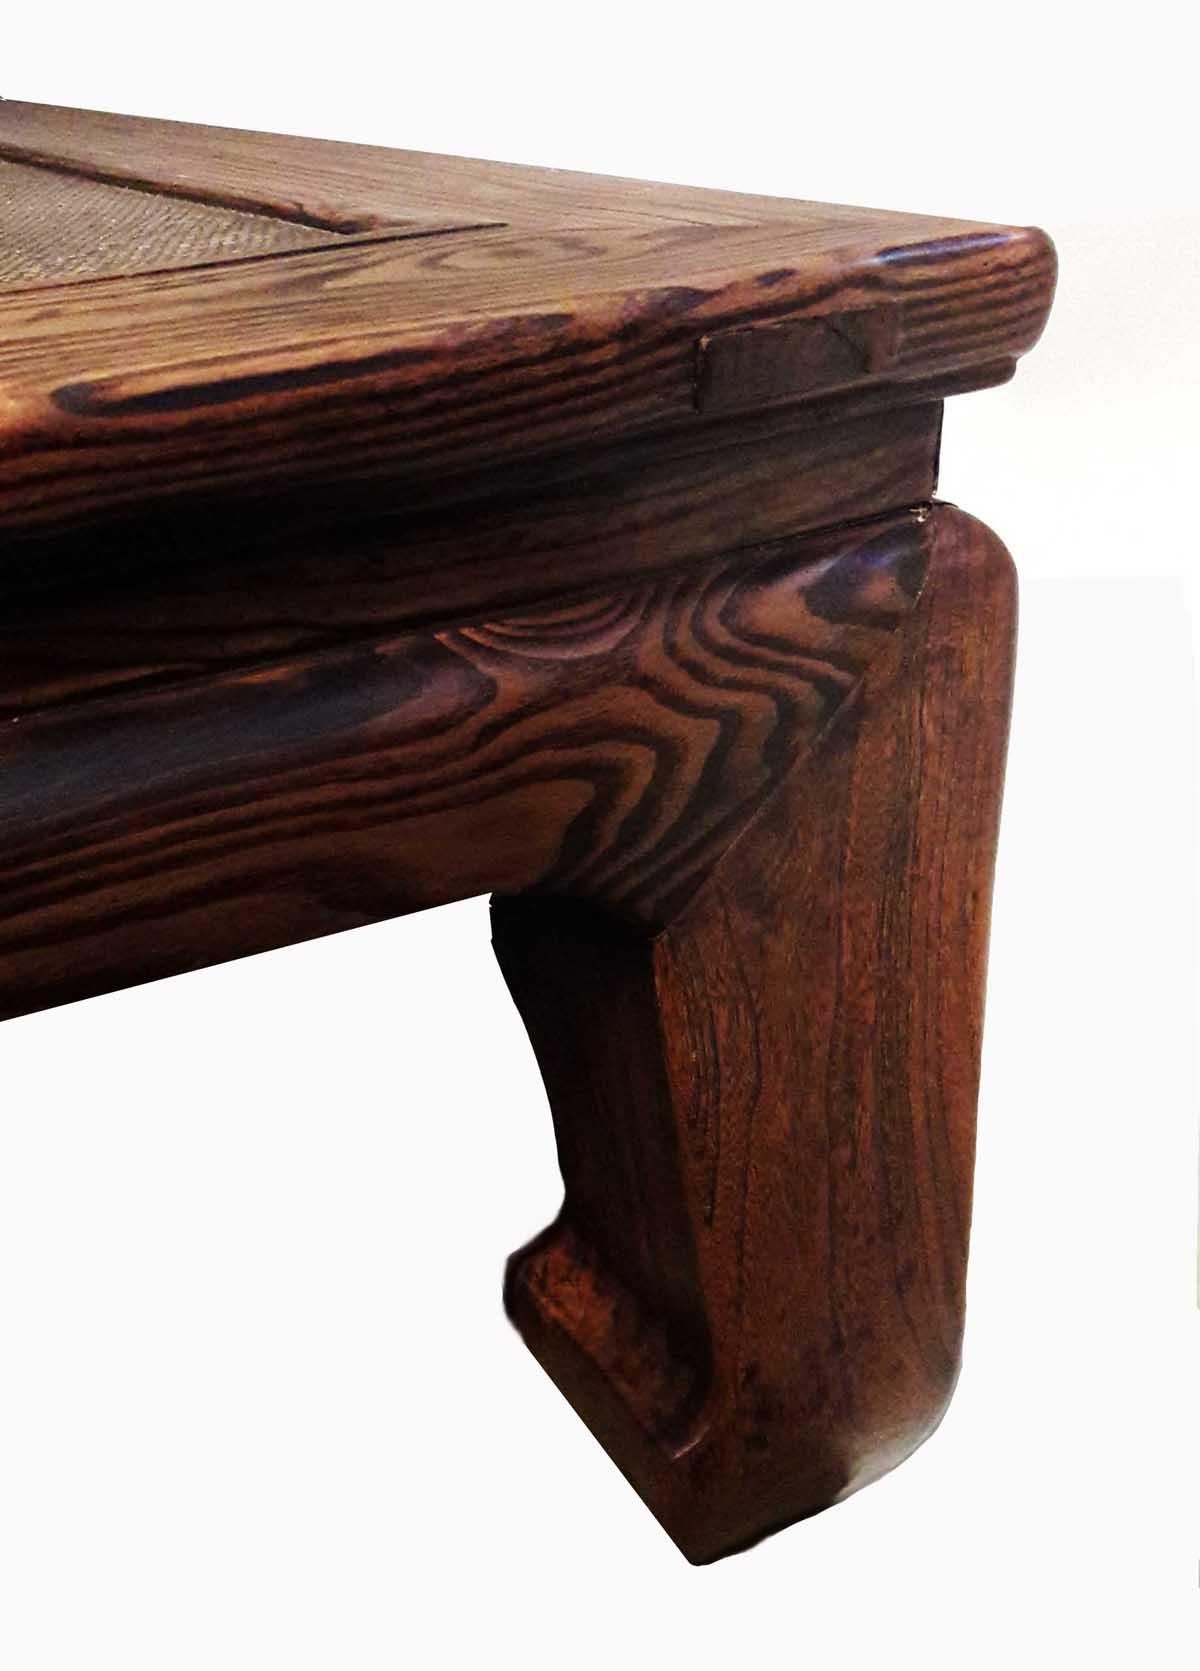 Polished 19th Century Elm Wood Coffee Table from China